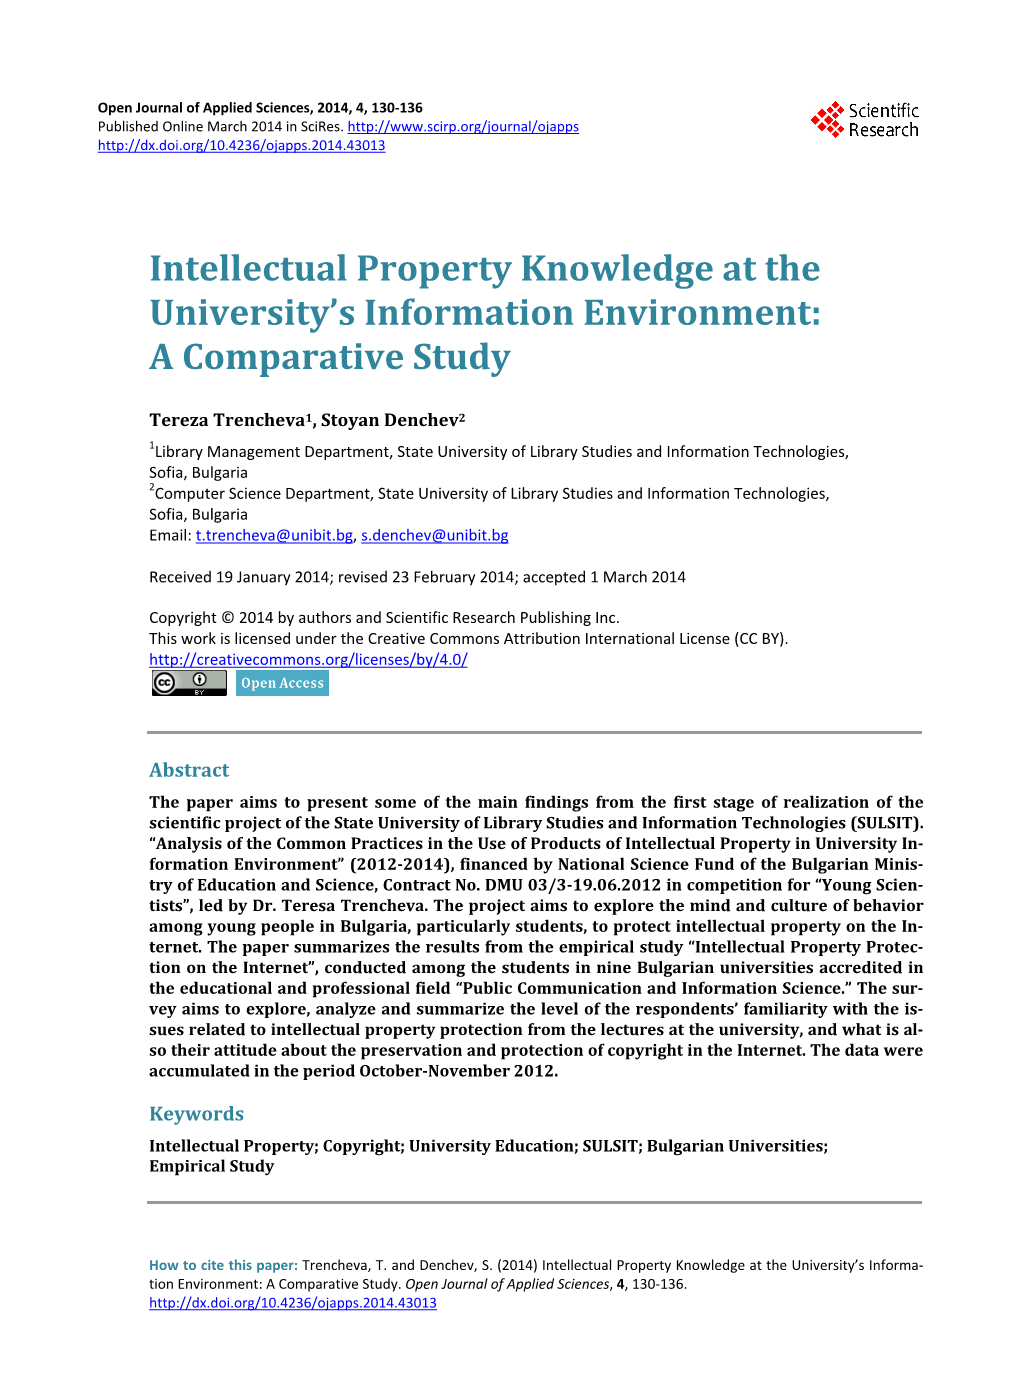 Intellectual Property Knowledge at the University's Information